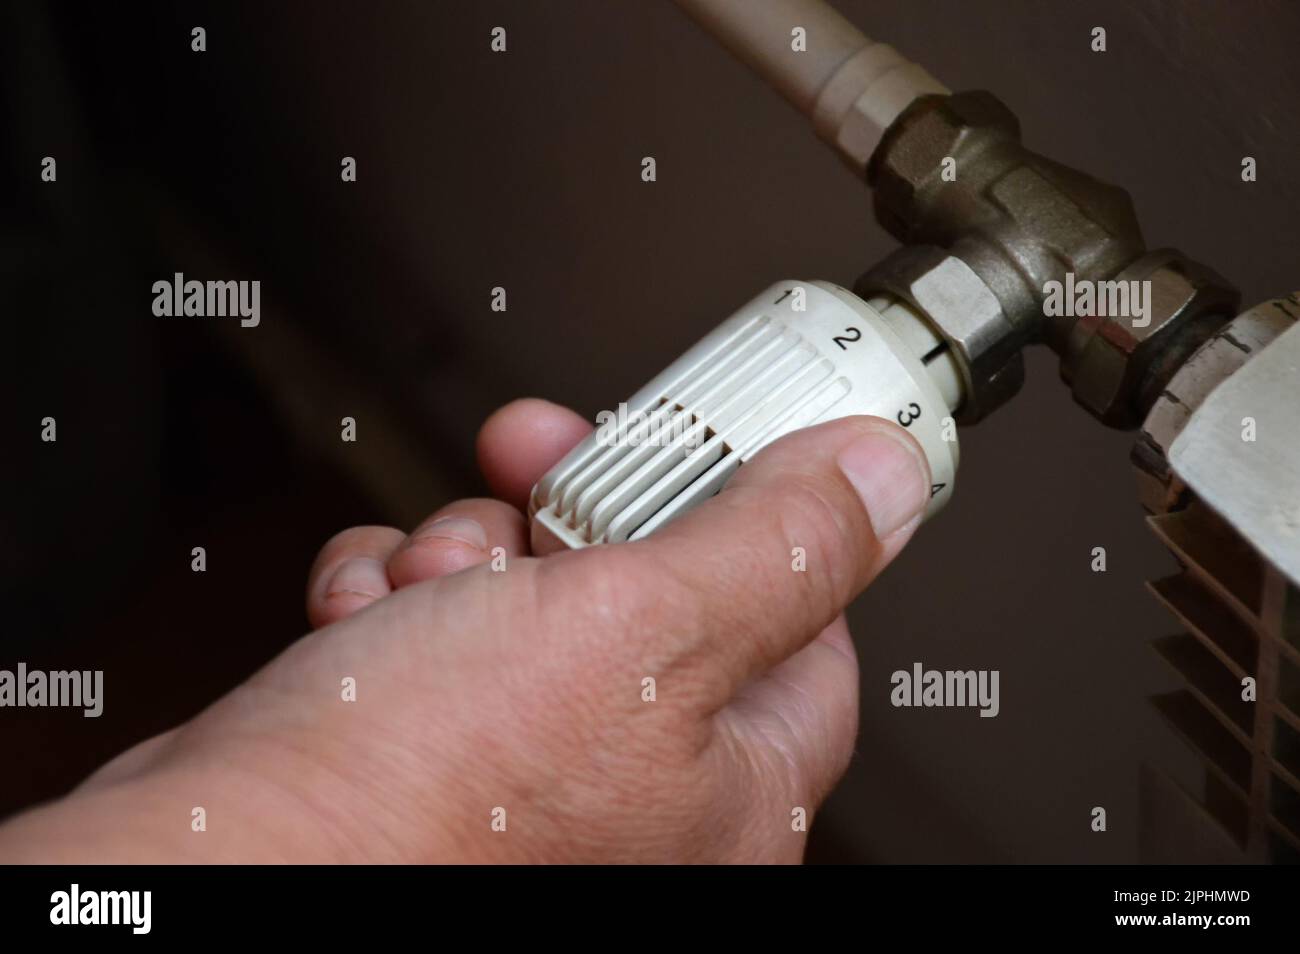 Controlling central heating temperature by adjusting thermostatic radiator valve Stock Photo